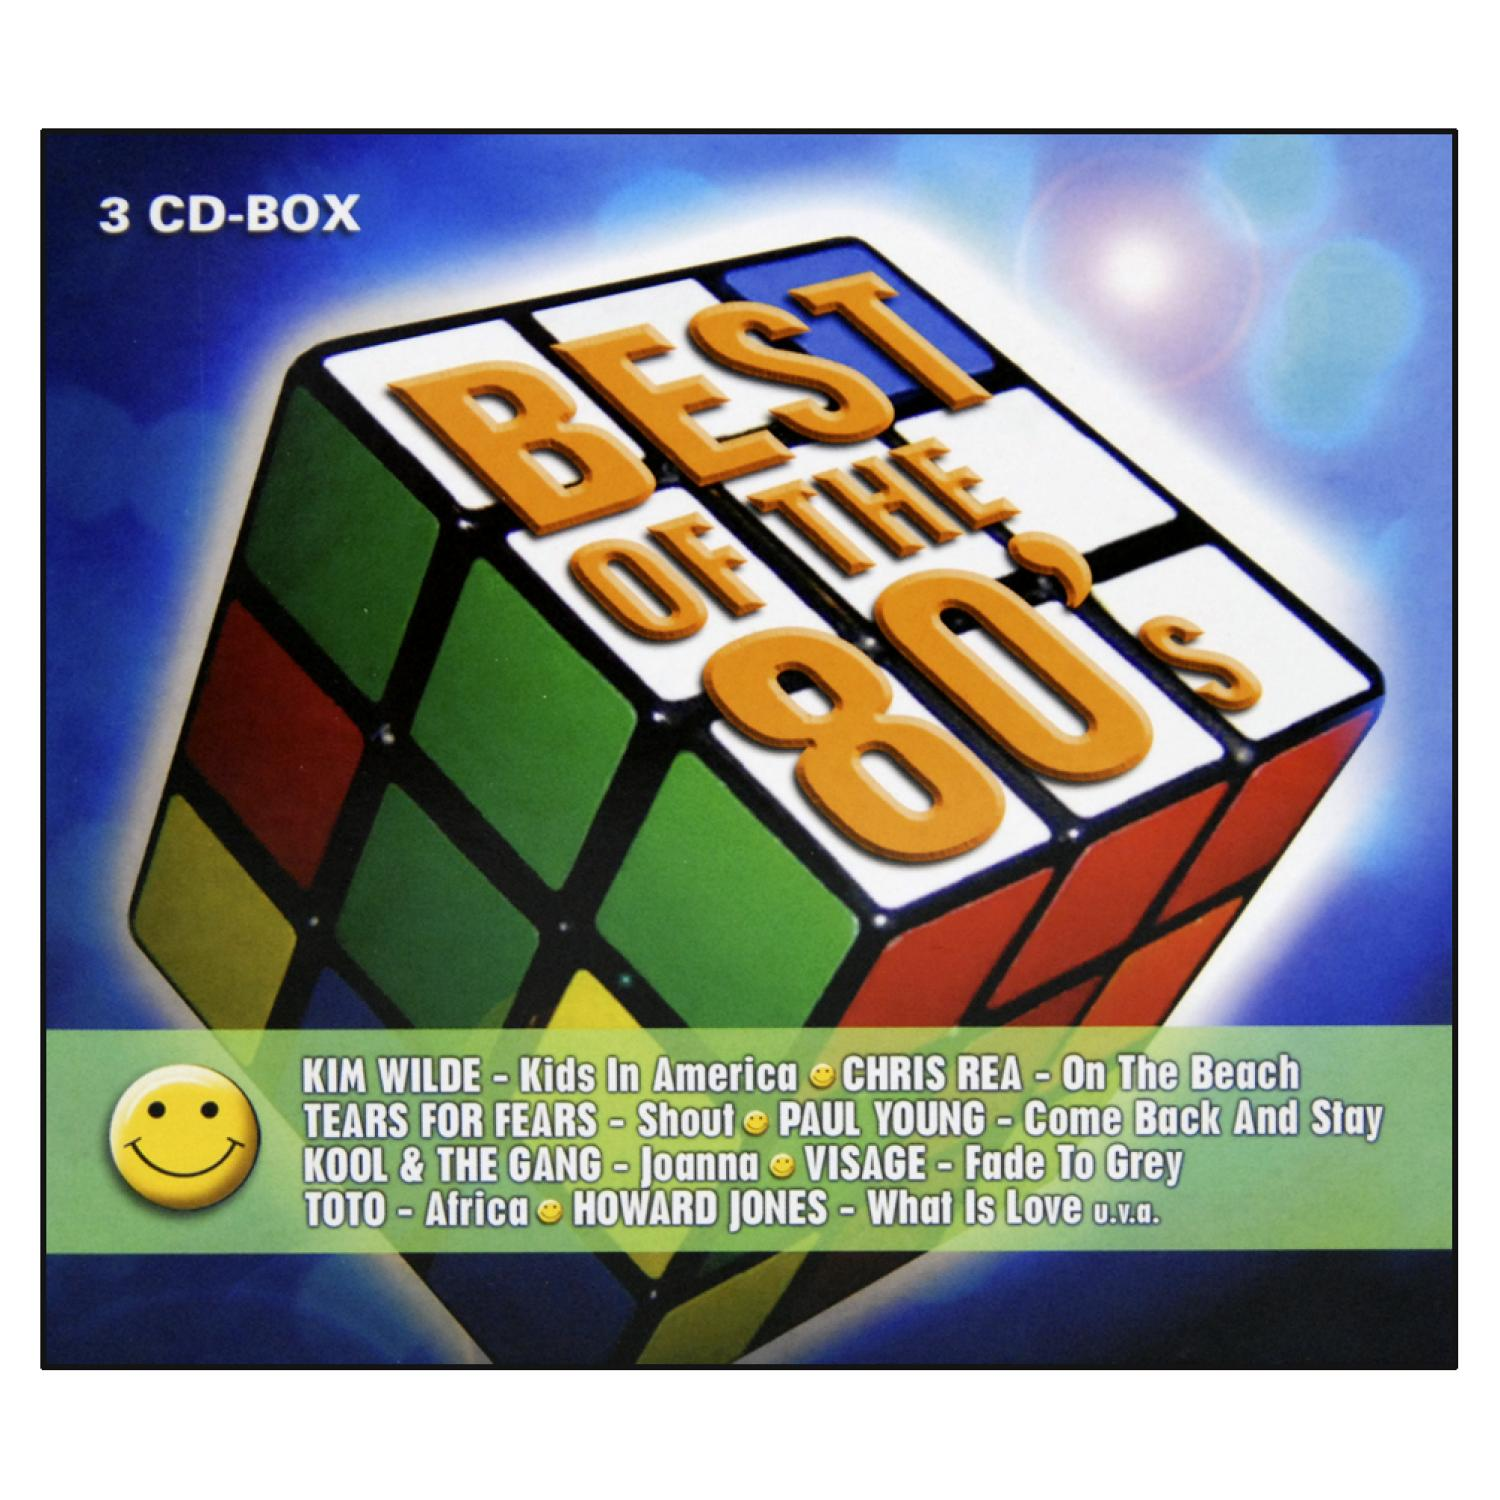 VARIOUS - Best The (CD) 80\'s - Of